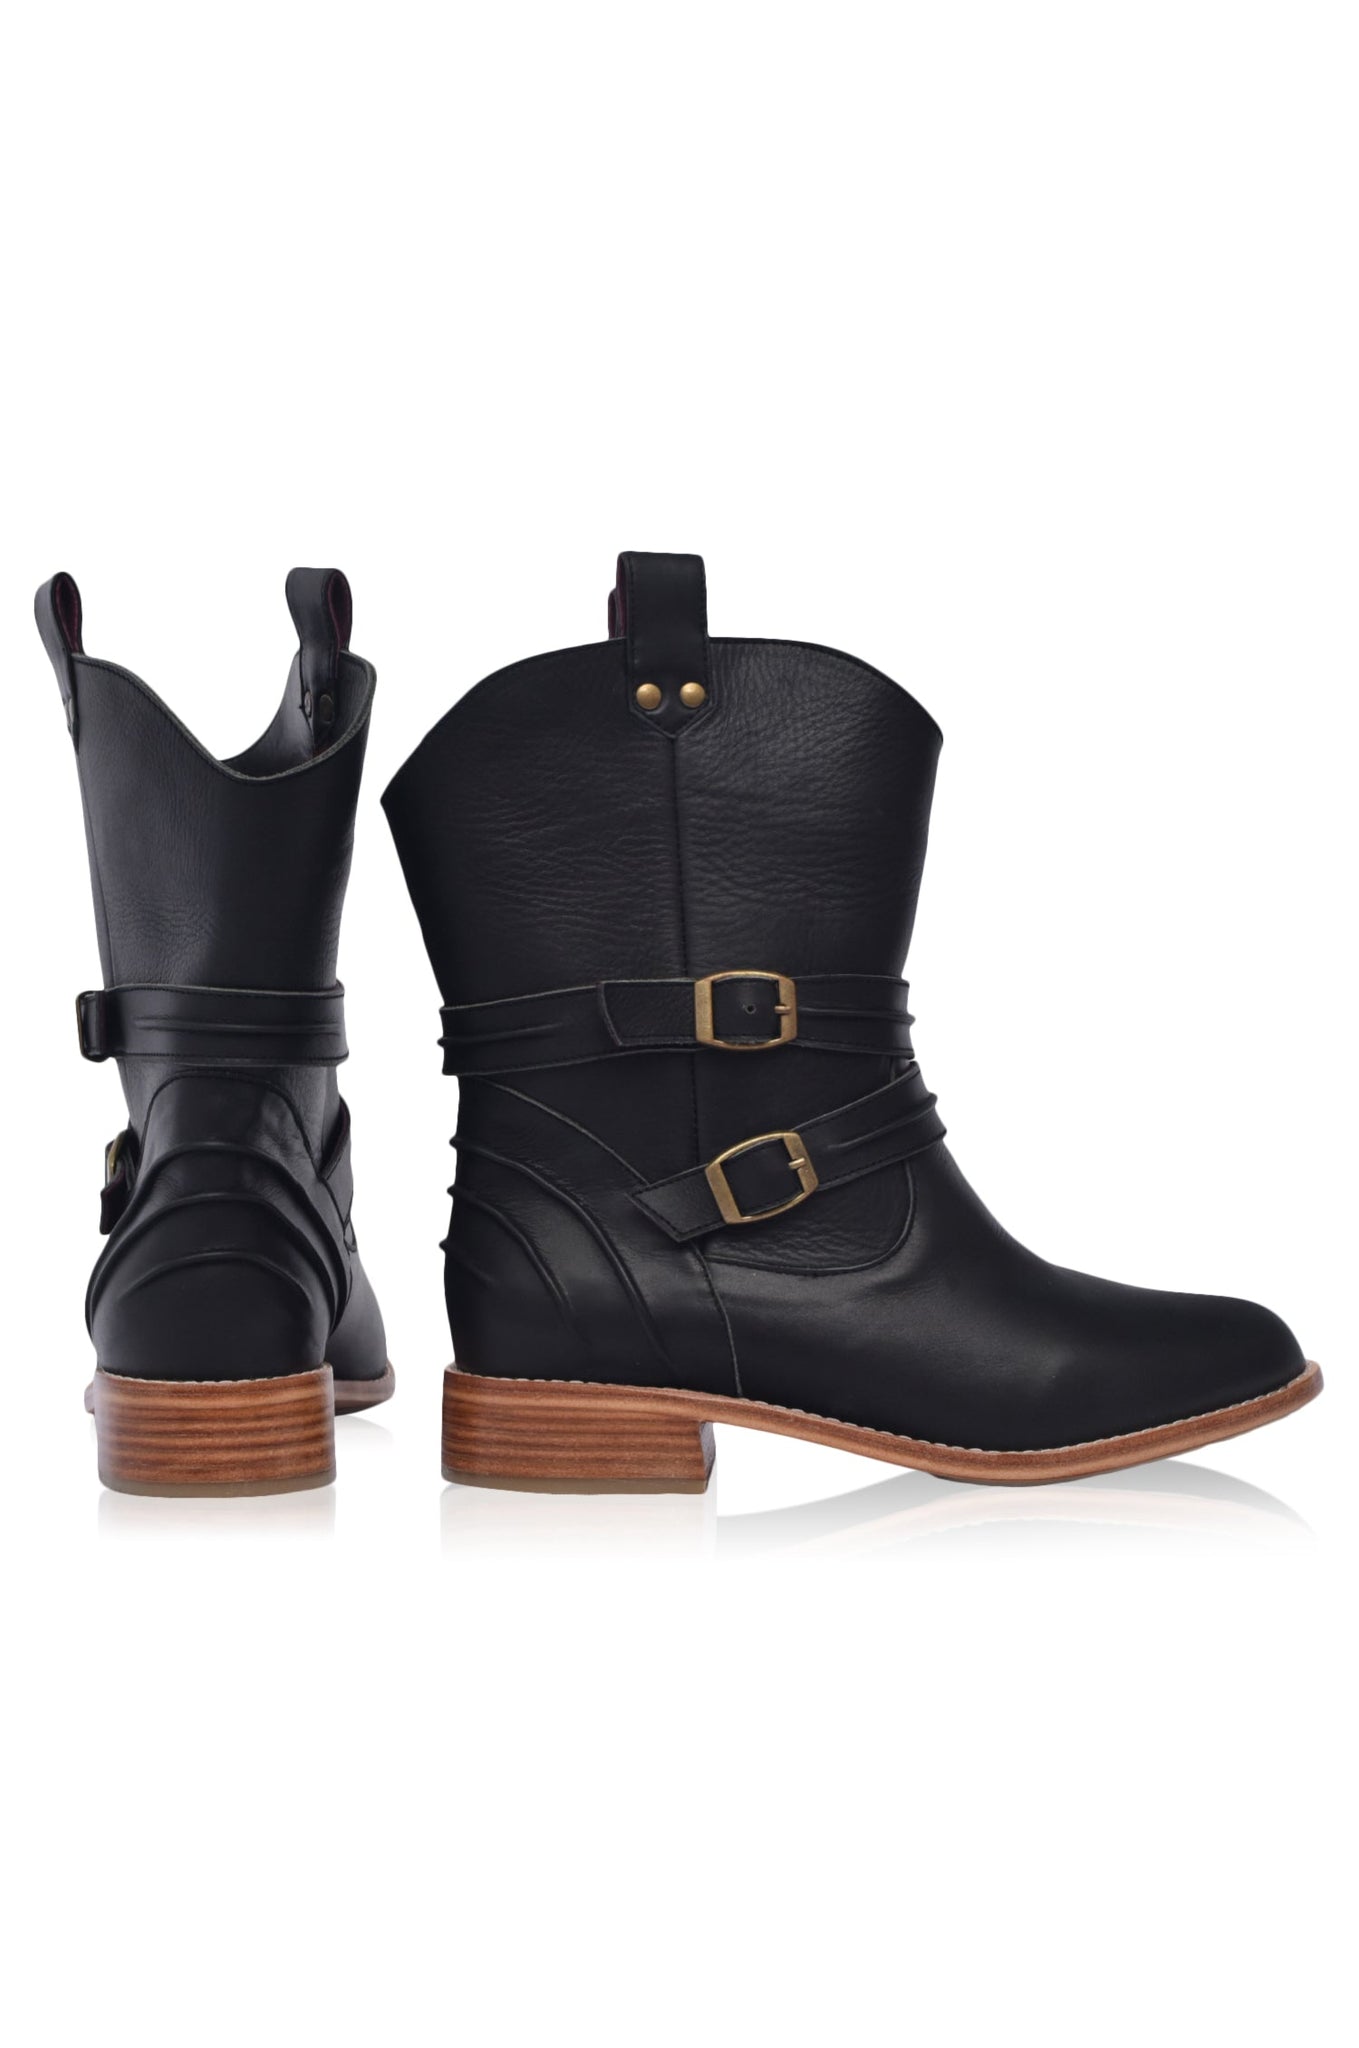 Barcelona Leather Boots (Sz. 7 & 9) by ELF